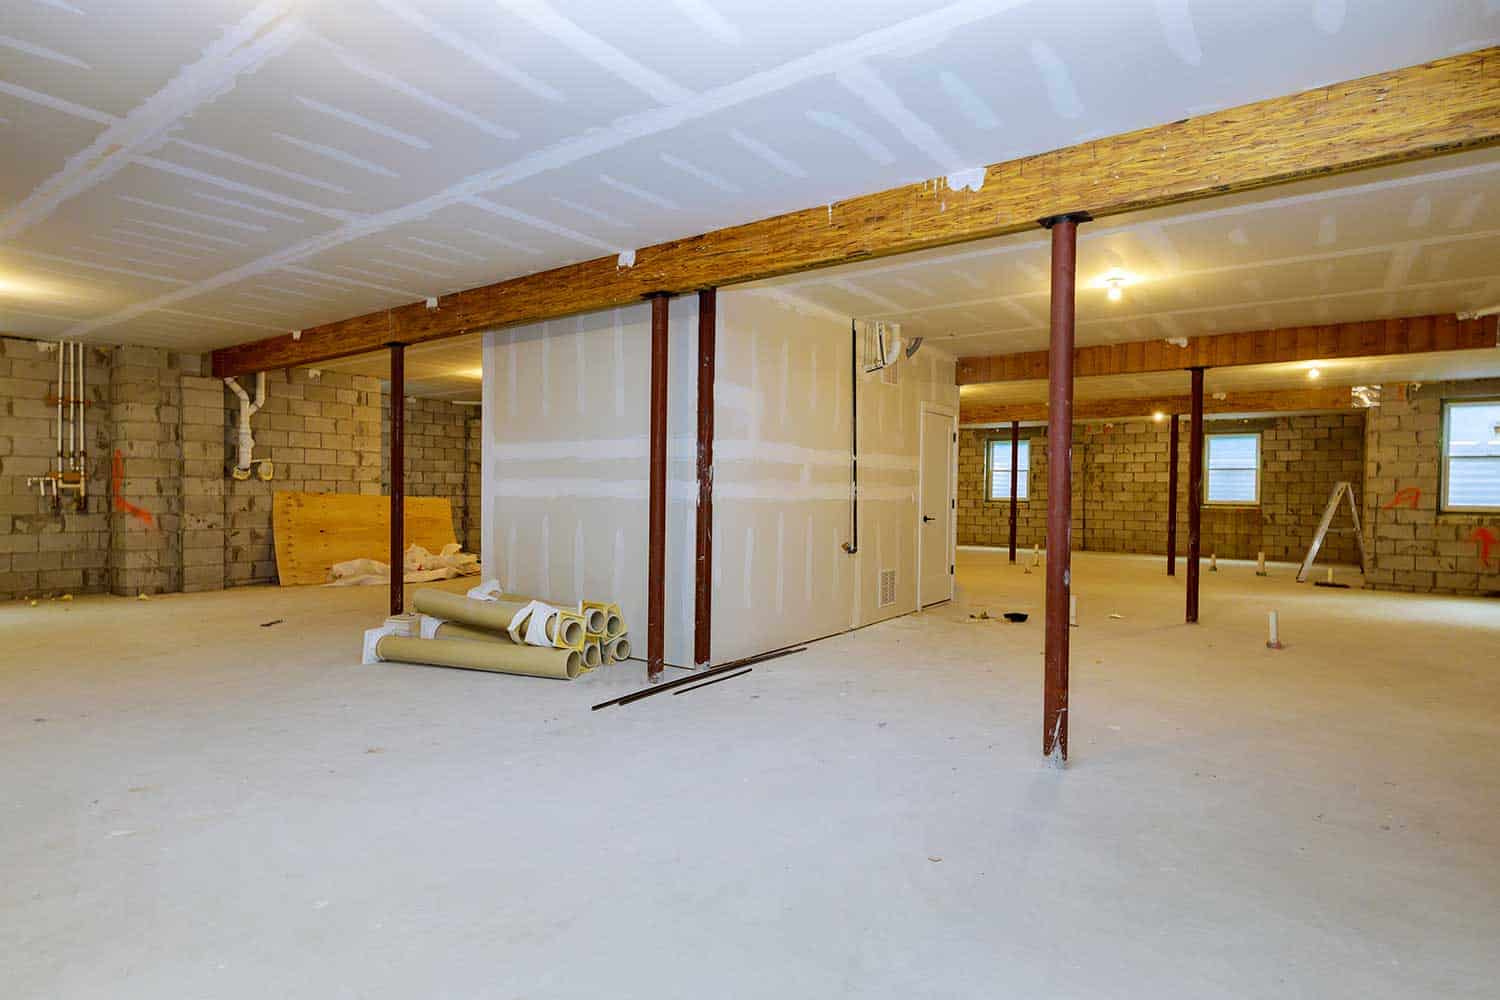 Unfinished basement framing interior wall of a new home construction